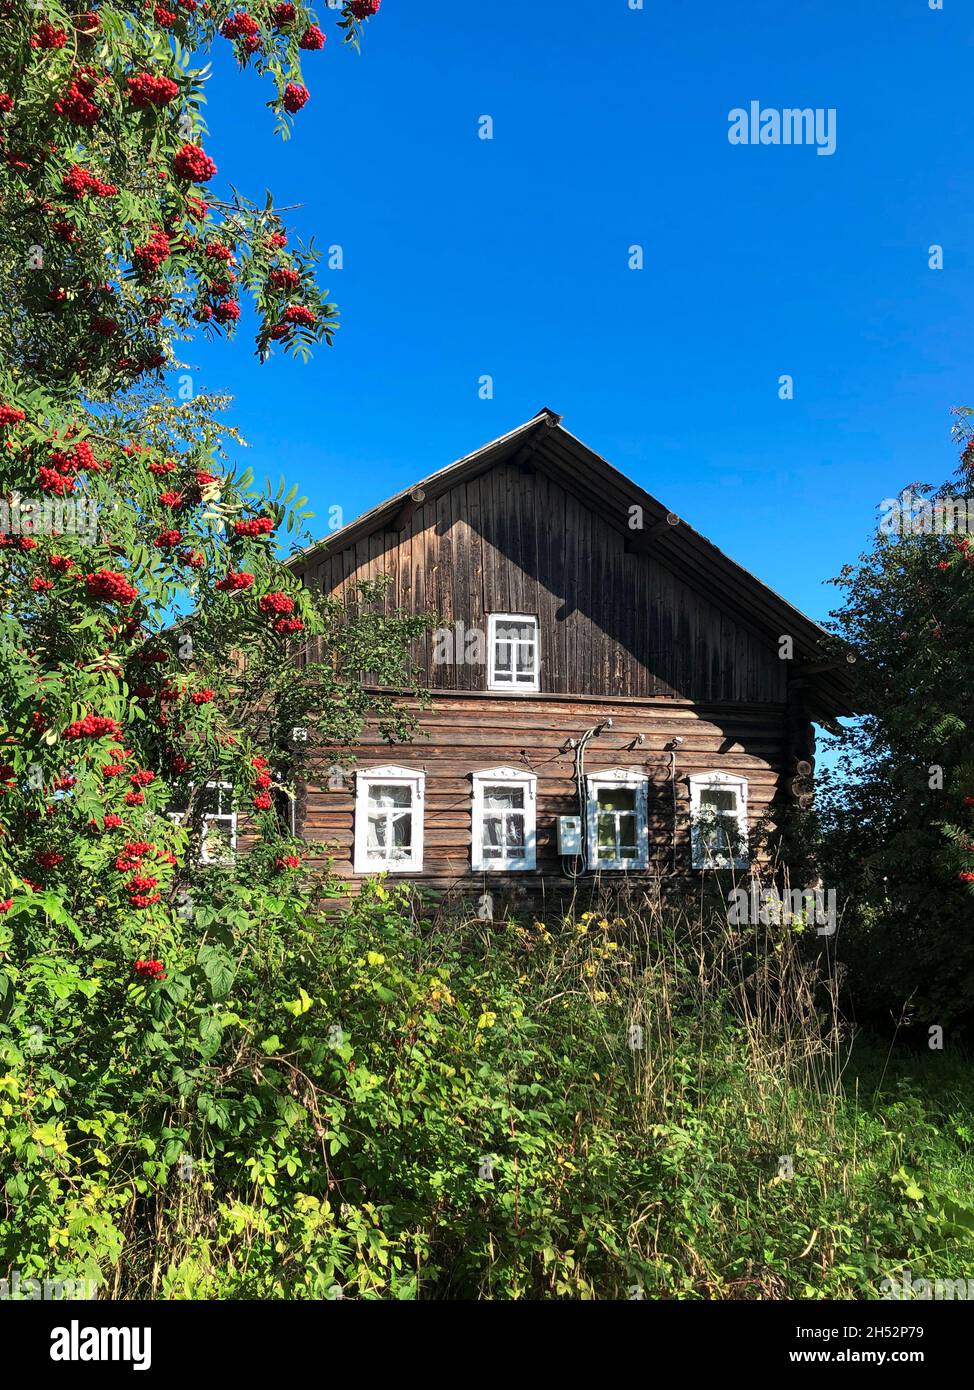 Front of old brown village wooden house with white windows on autumn nature landscape background Stock Photo